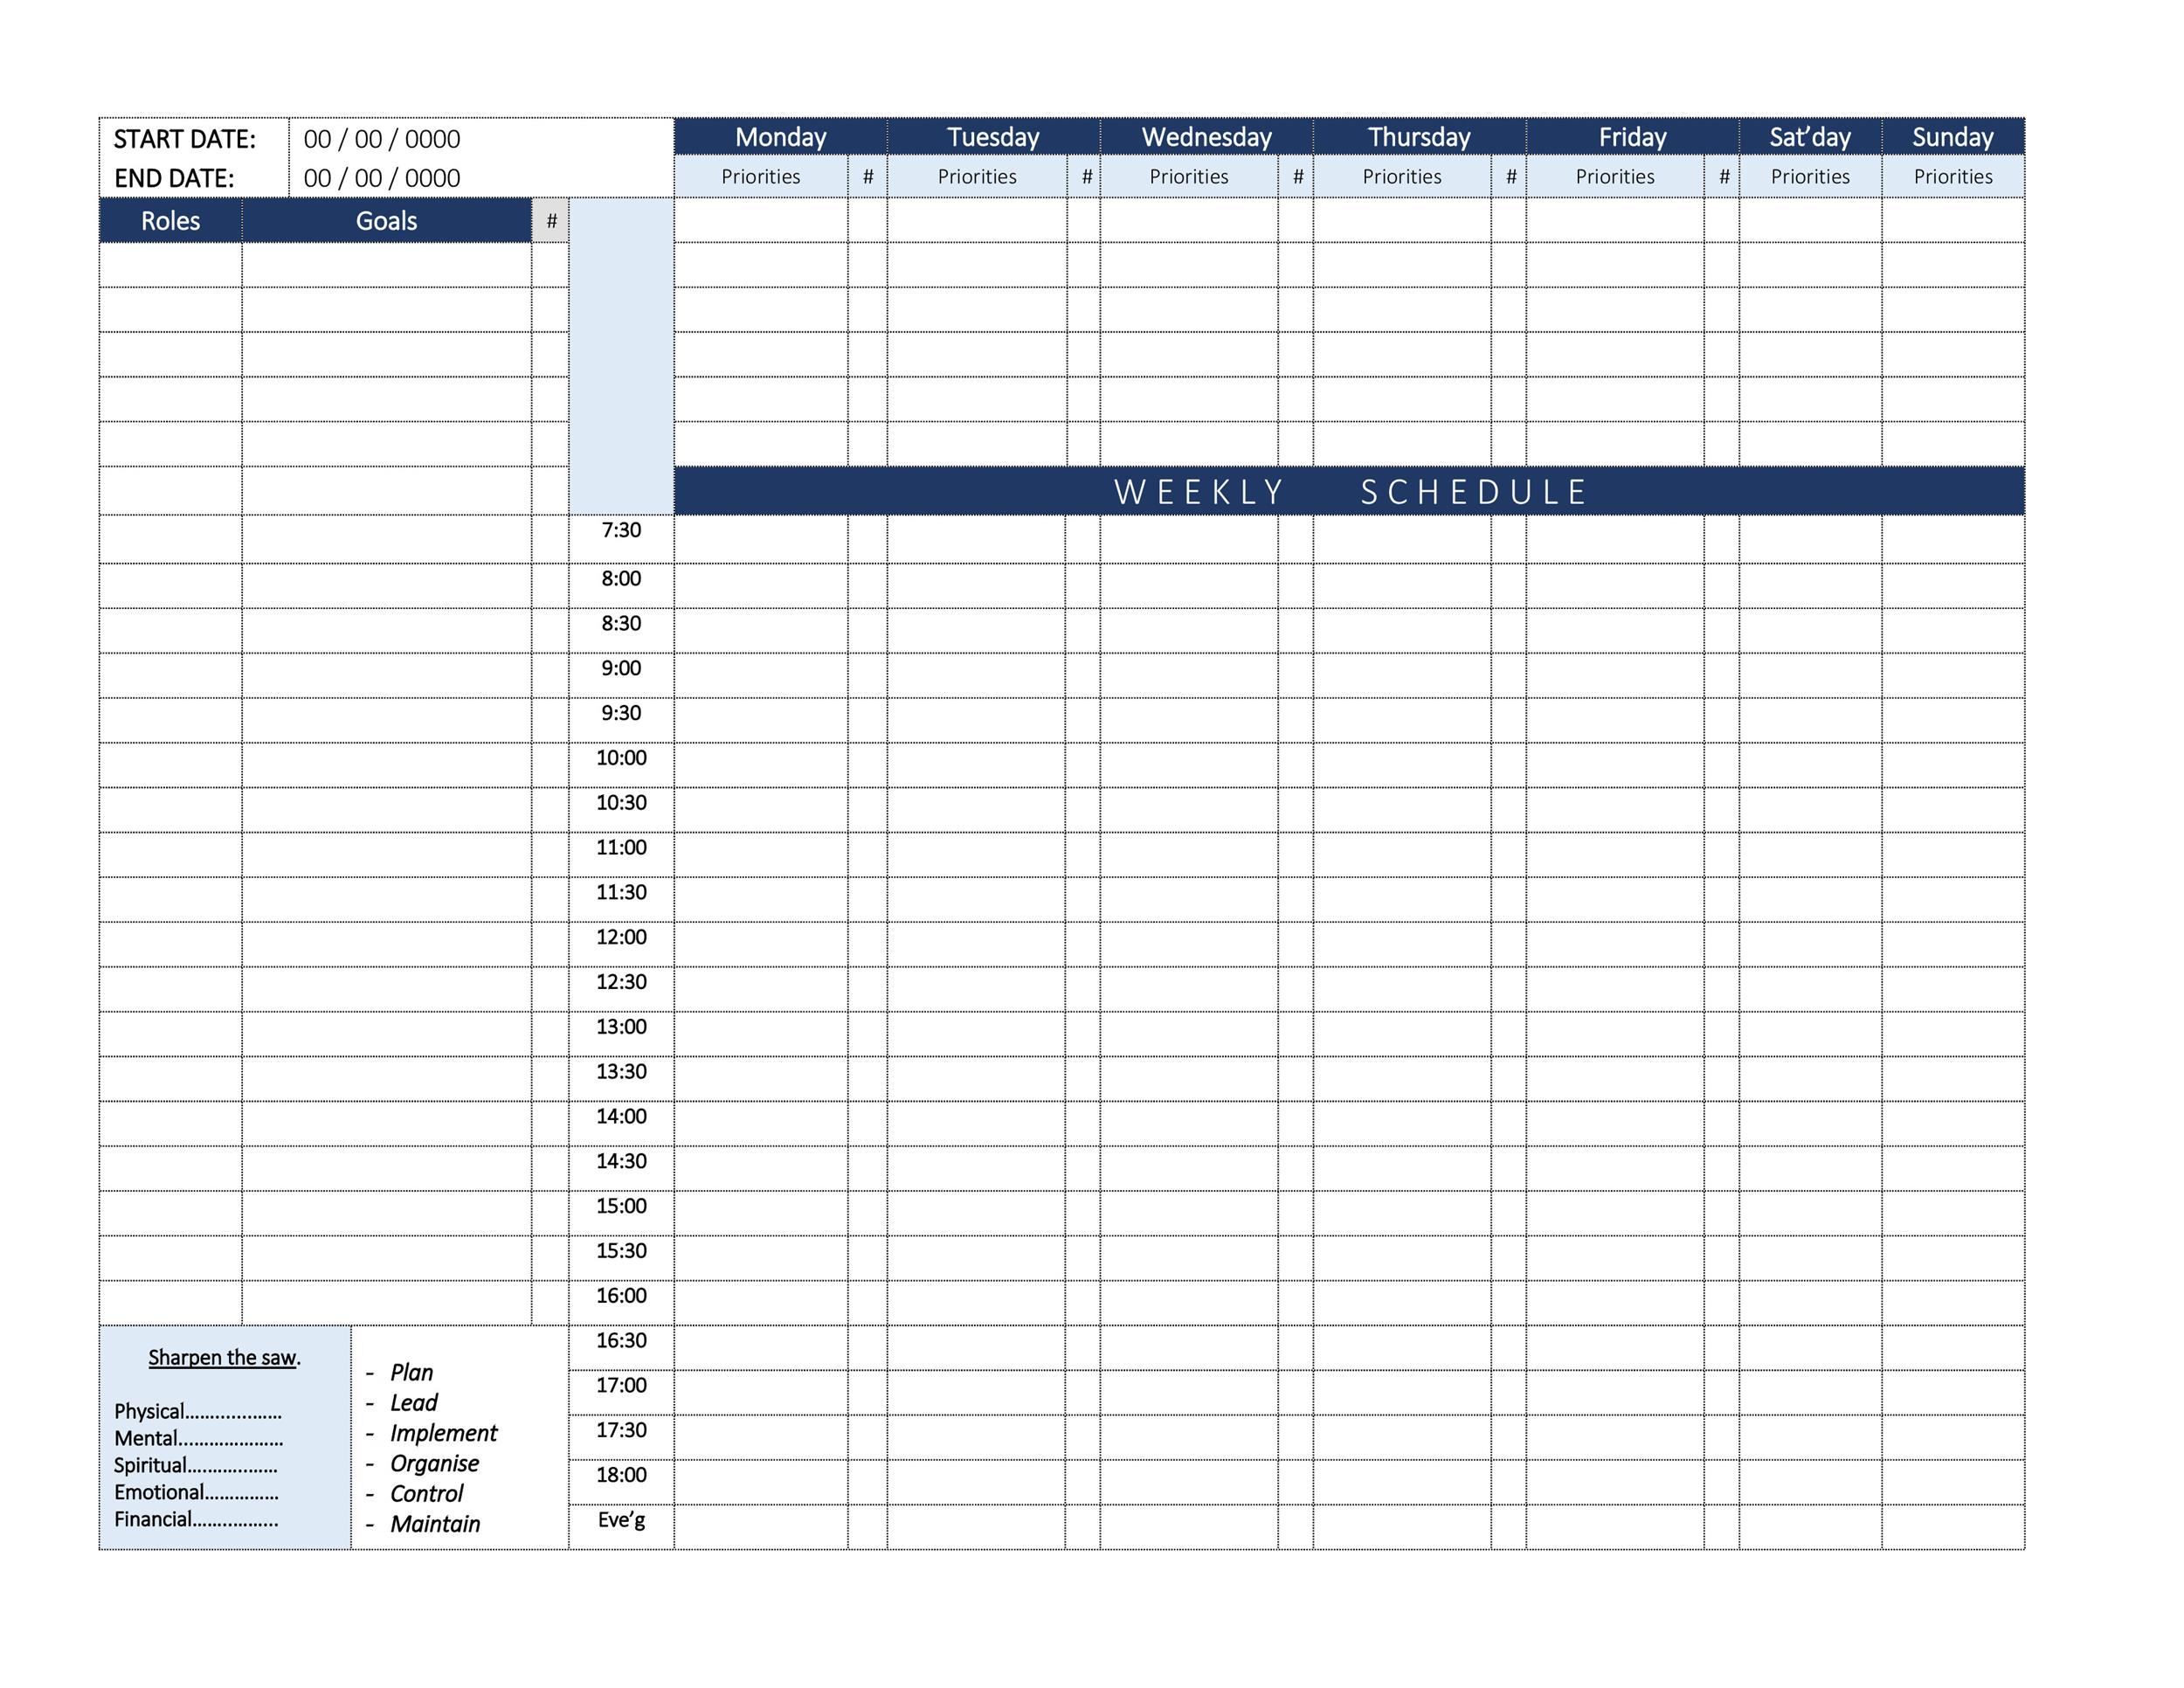 propsed calendar for work outs on excel 27